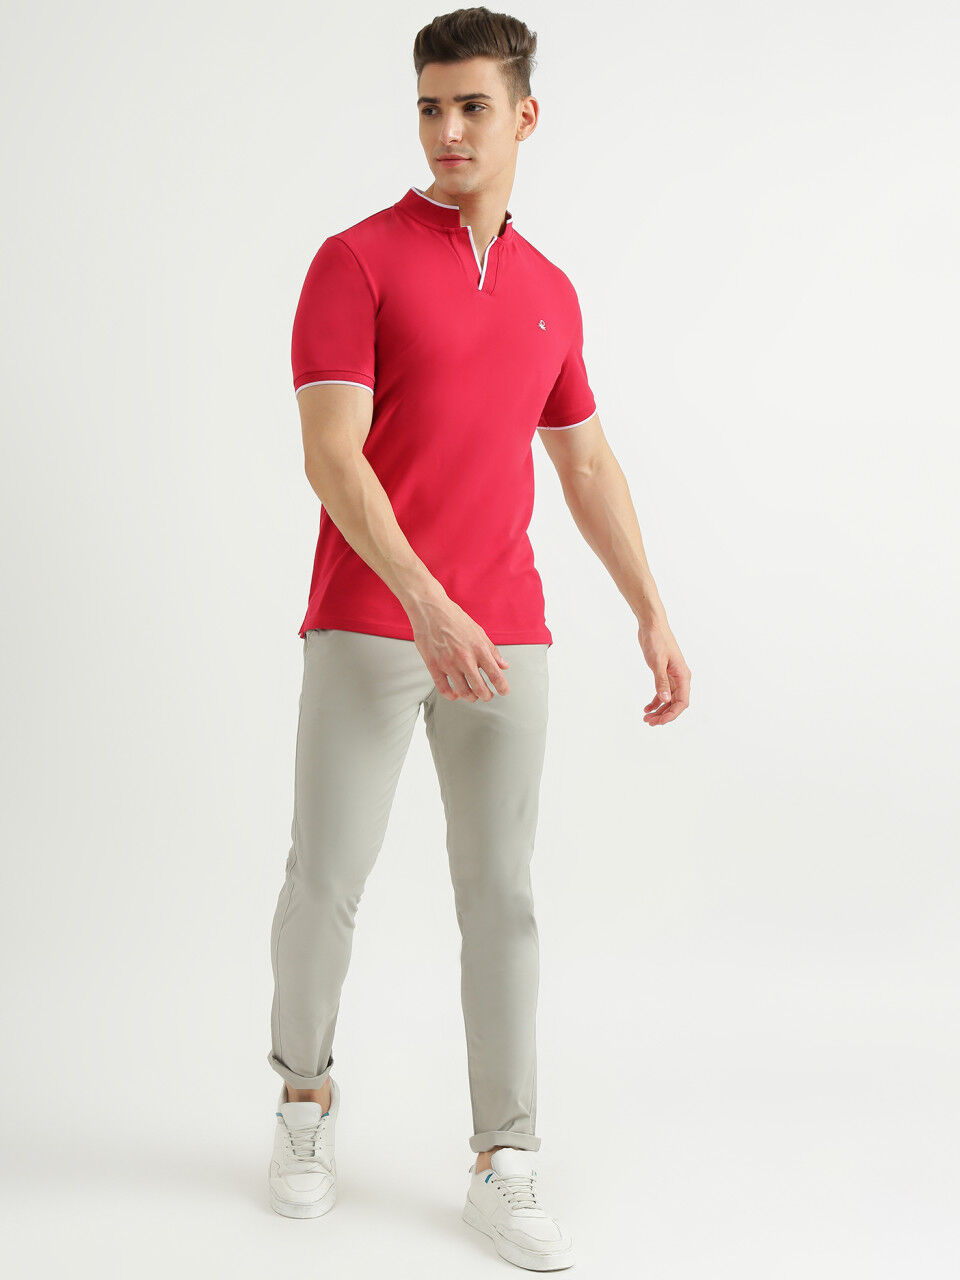 United Colors Of Benetton Mens Slim Fit Solid Trousers